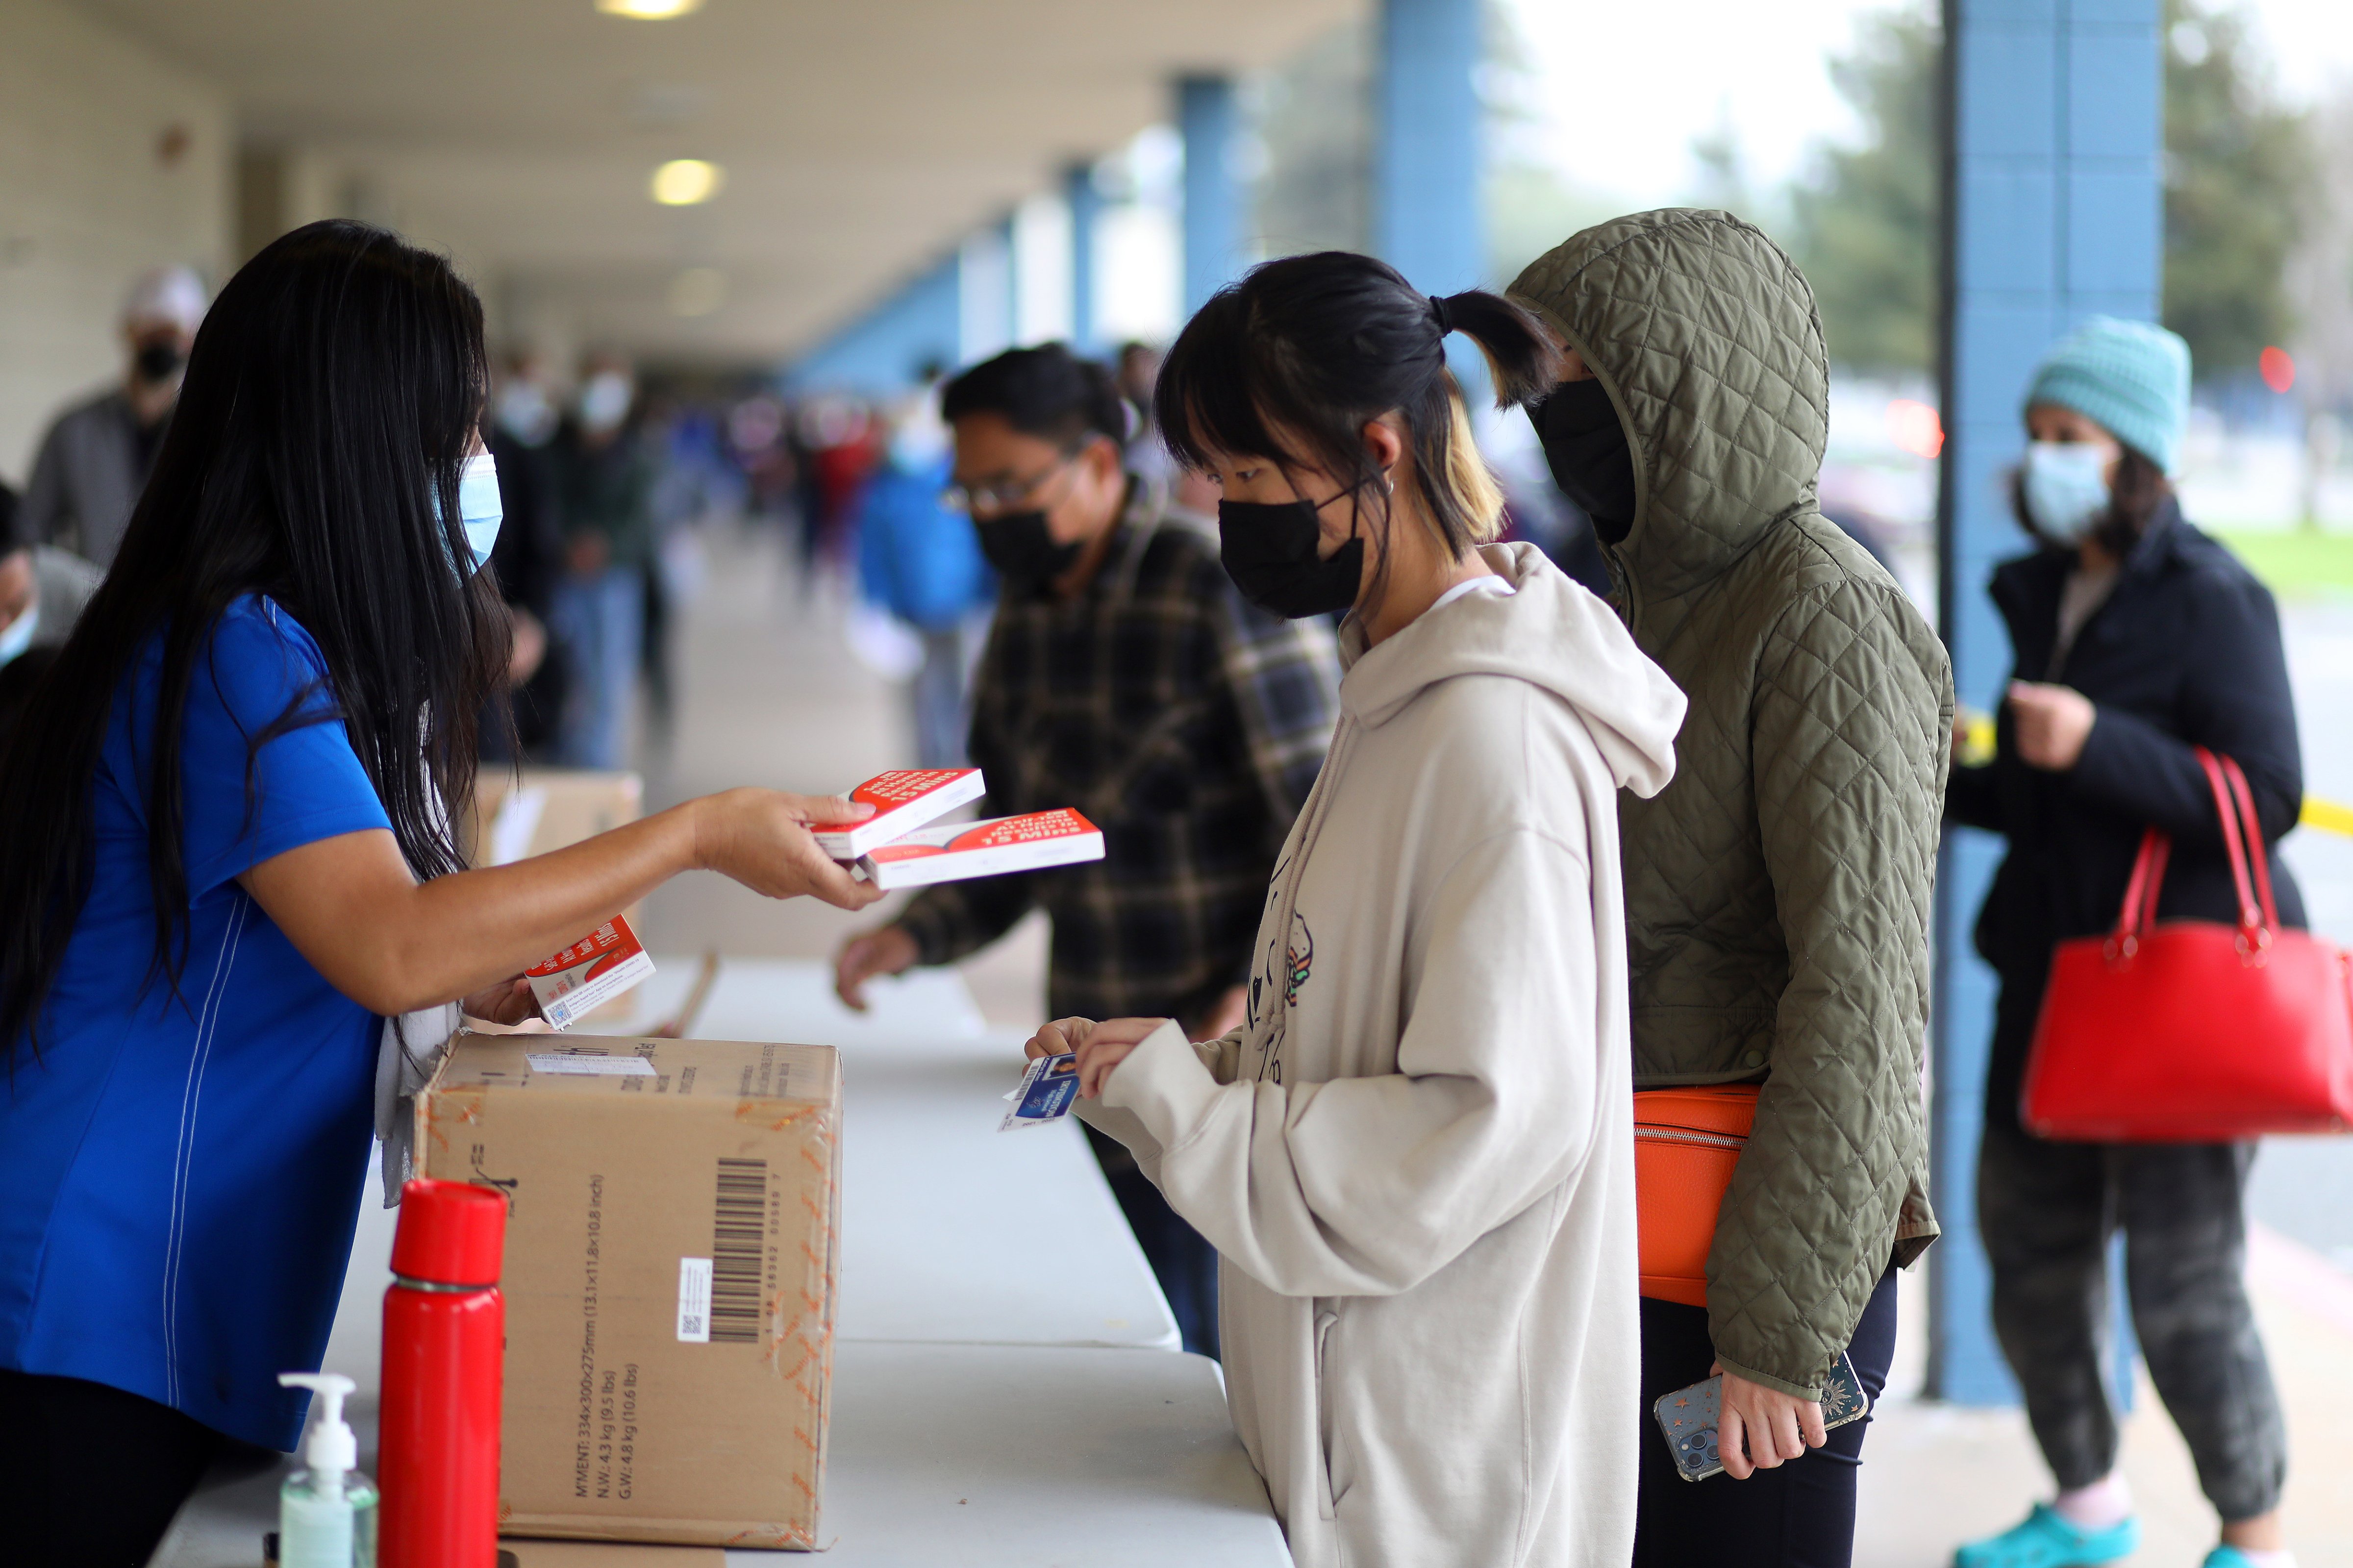 Fremont Unified School District staff members distribute COVID-19 rapid tests to students at Irvington High School on Jan. 6, 2022, in Fremont, Calif. (Aric Crabb—MediaNews Group/Getty Images)